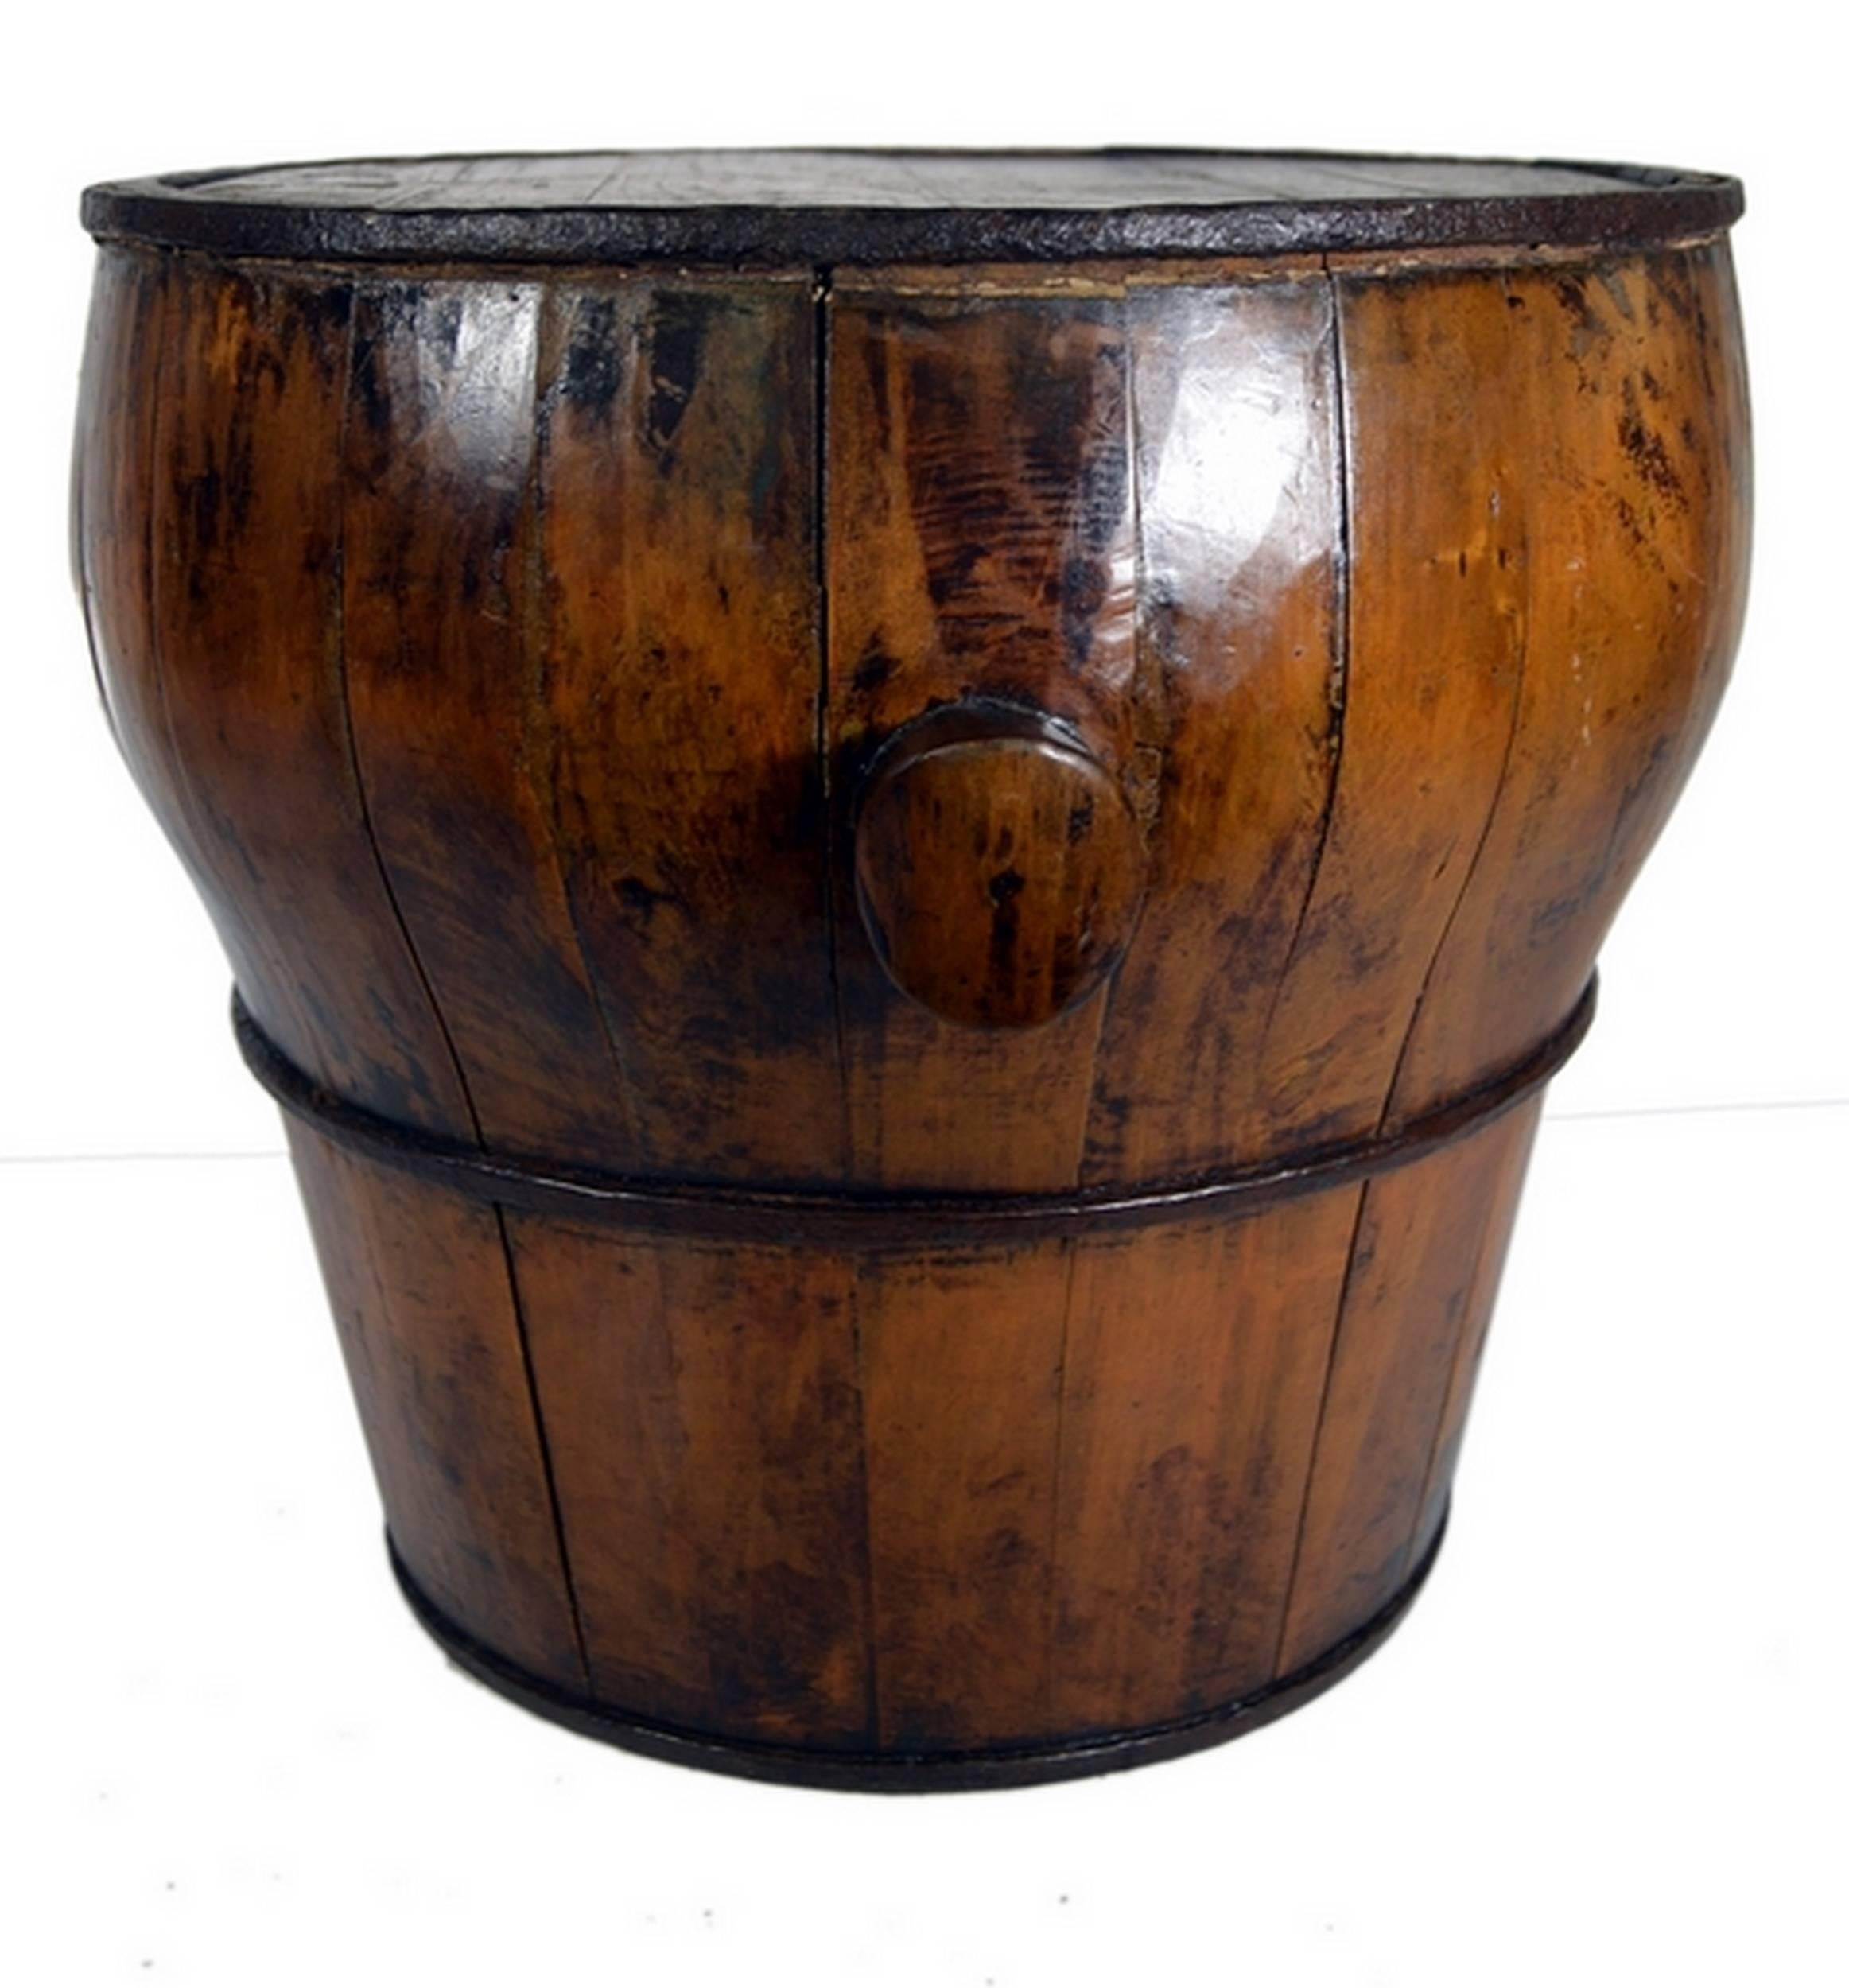 Chinese Antique Handmade Drum-Shaped Varnished Grain Basket from 19th Century, China